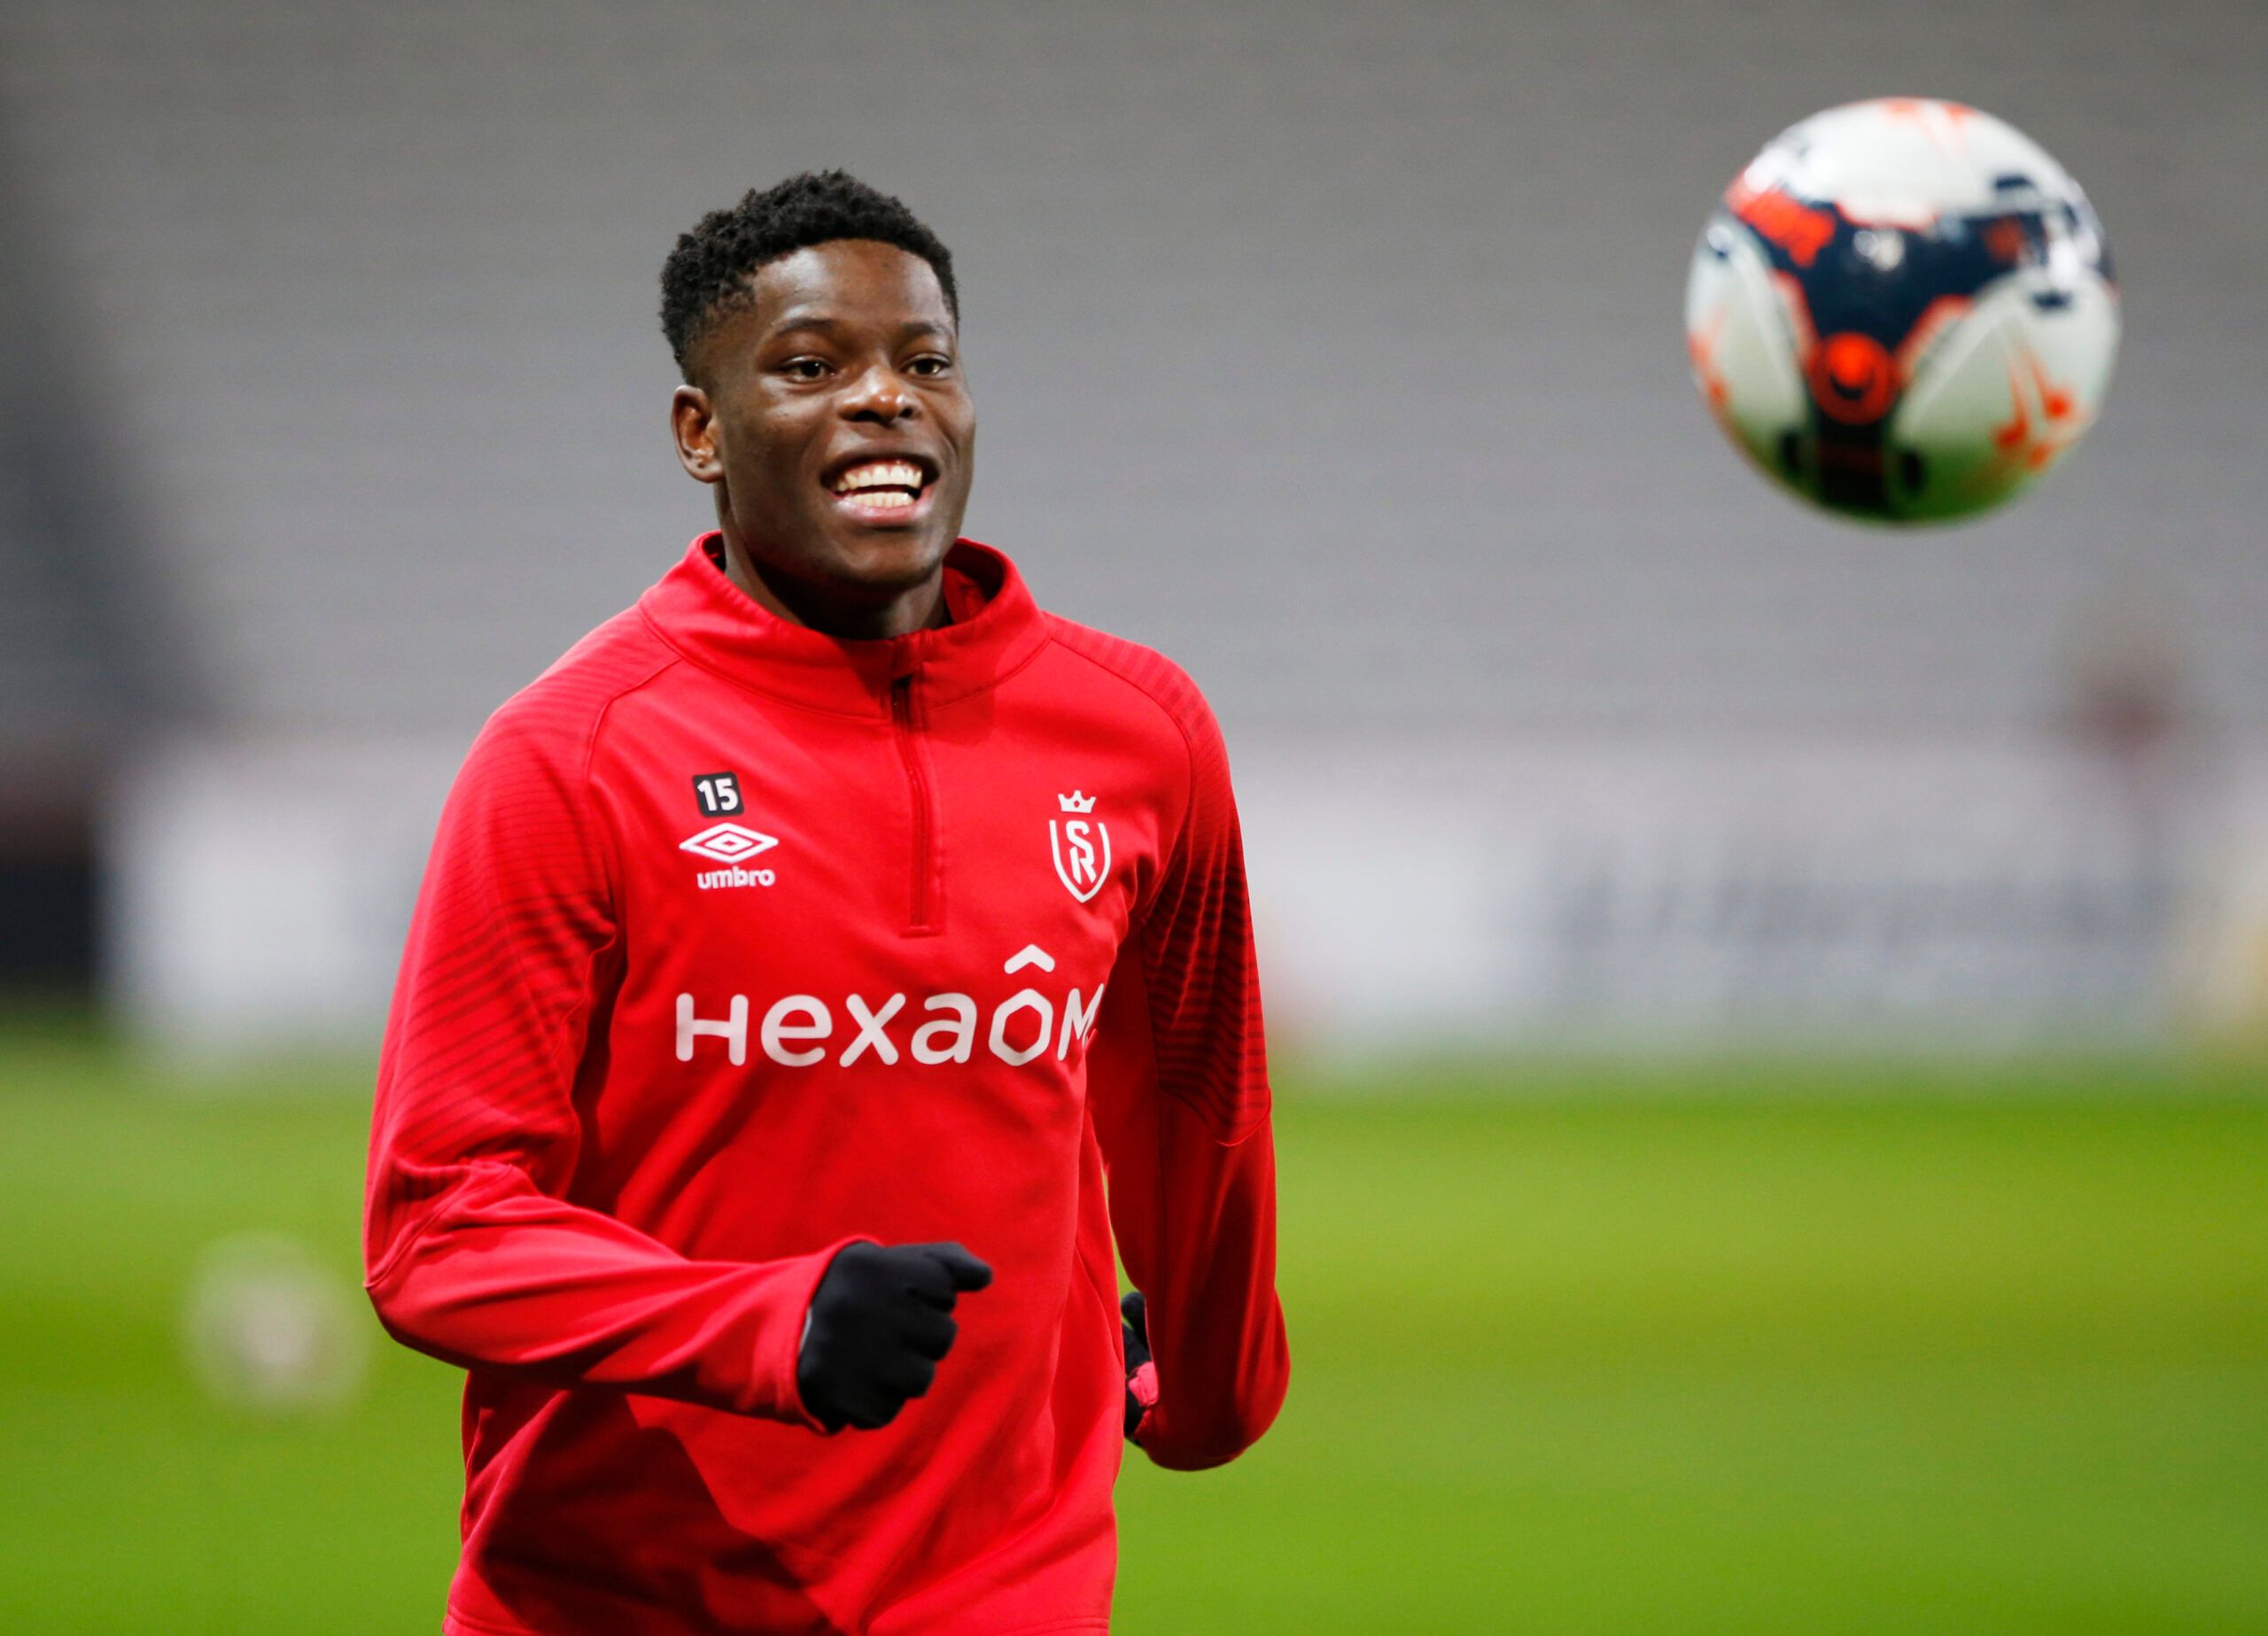 Soccer Football - Ligue 1 - Lille v Stade de Reims - Stade Pierre-Mauroy, Lille, France - January 17, 2021 Stade de Reims' Marshall Munetsi during the warm up before the match REUTERS/Pascal Rossignol